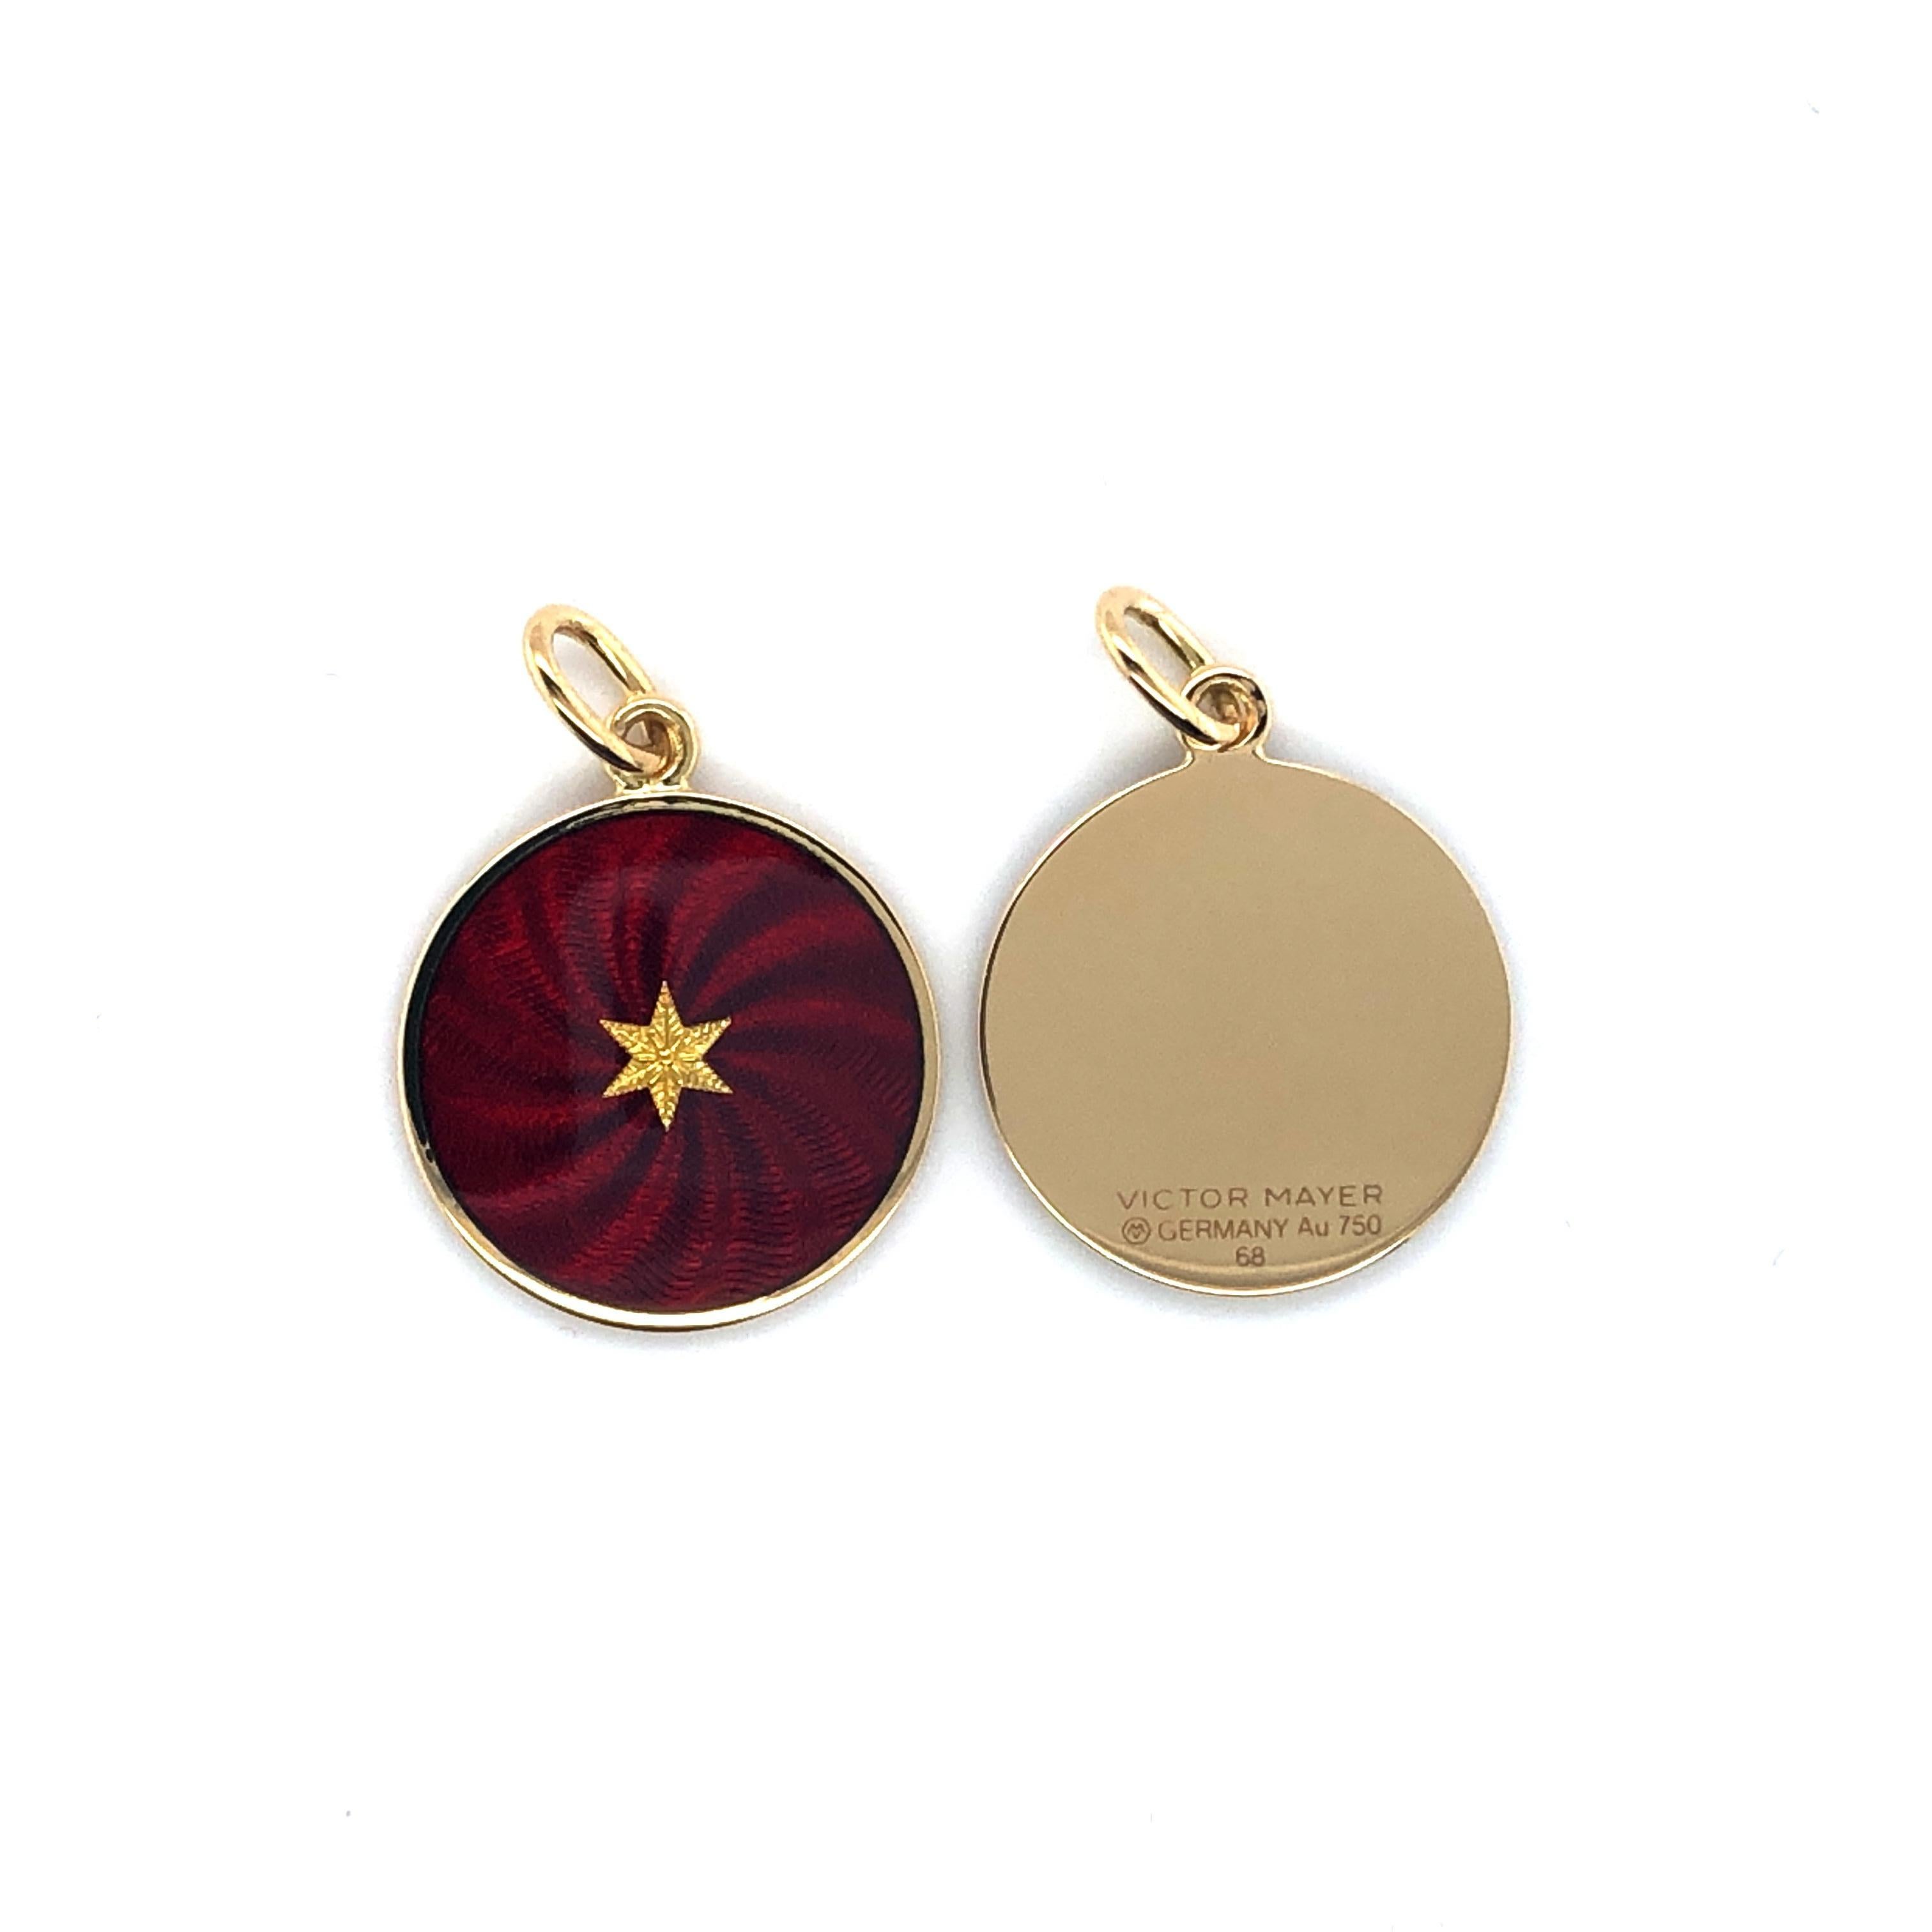 Victor Mayer disc pendant necklace, 18k yellow gold, Diskos collection, burgundy red vitreous & guilloche enamel with star paillon, diameter app. 15 mm

About the creator Victor Mayer
Victor Mayer is internationally renowned for elegant timeless